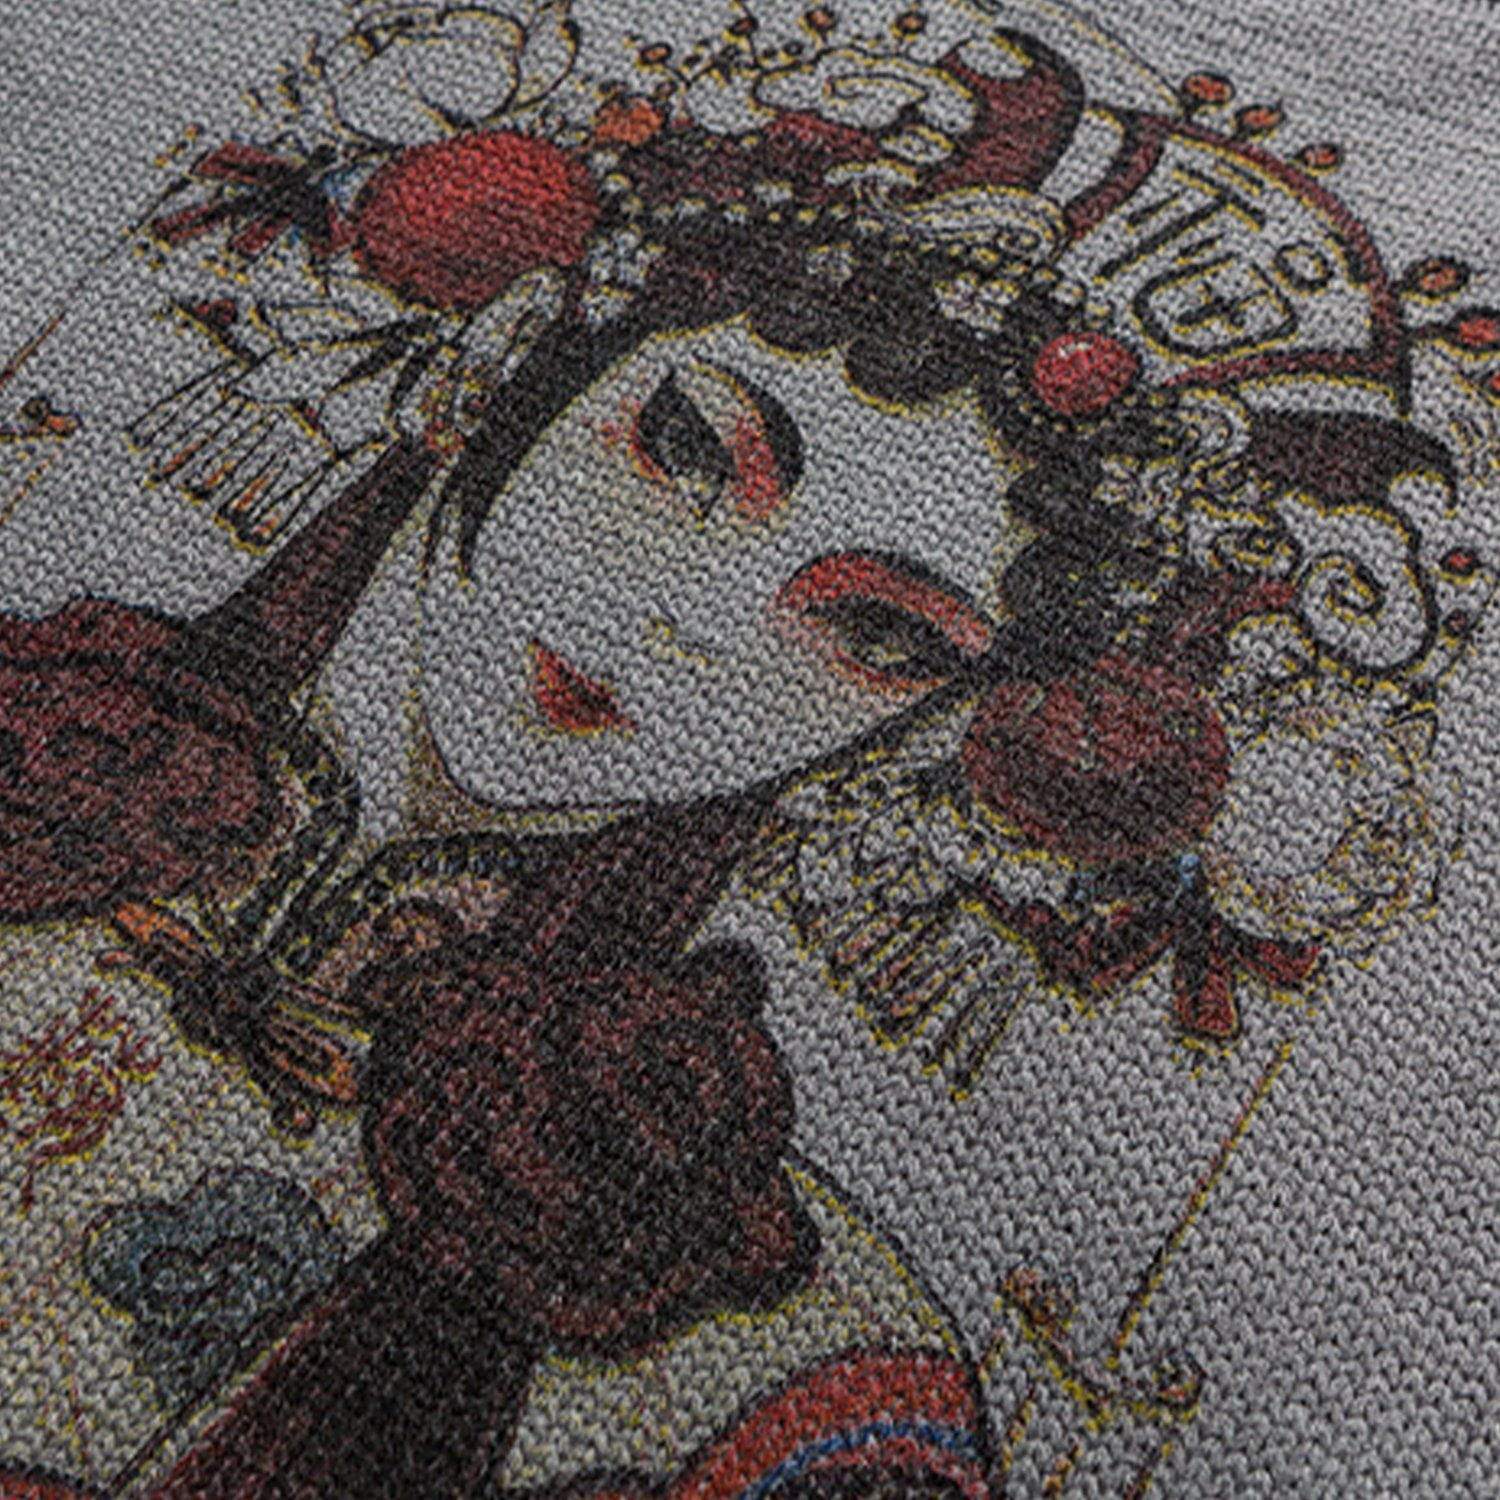 JUSTNOTAG Vintage Chinese Style Peking Opera Print Knitted Sweater